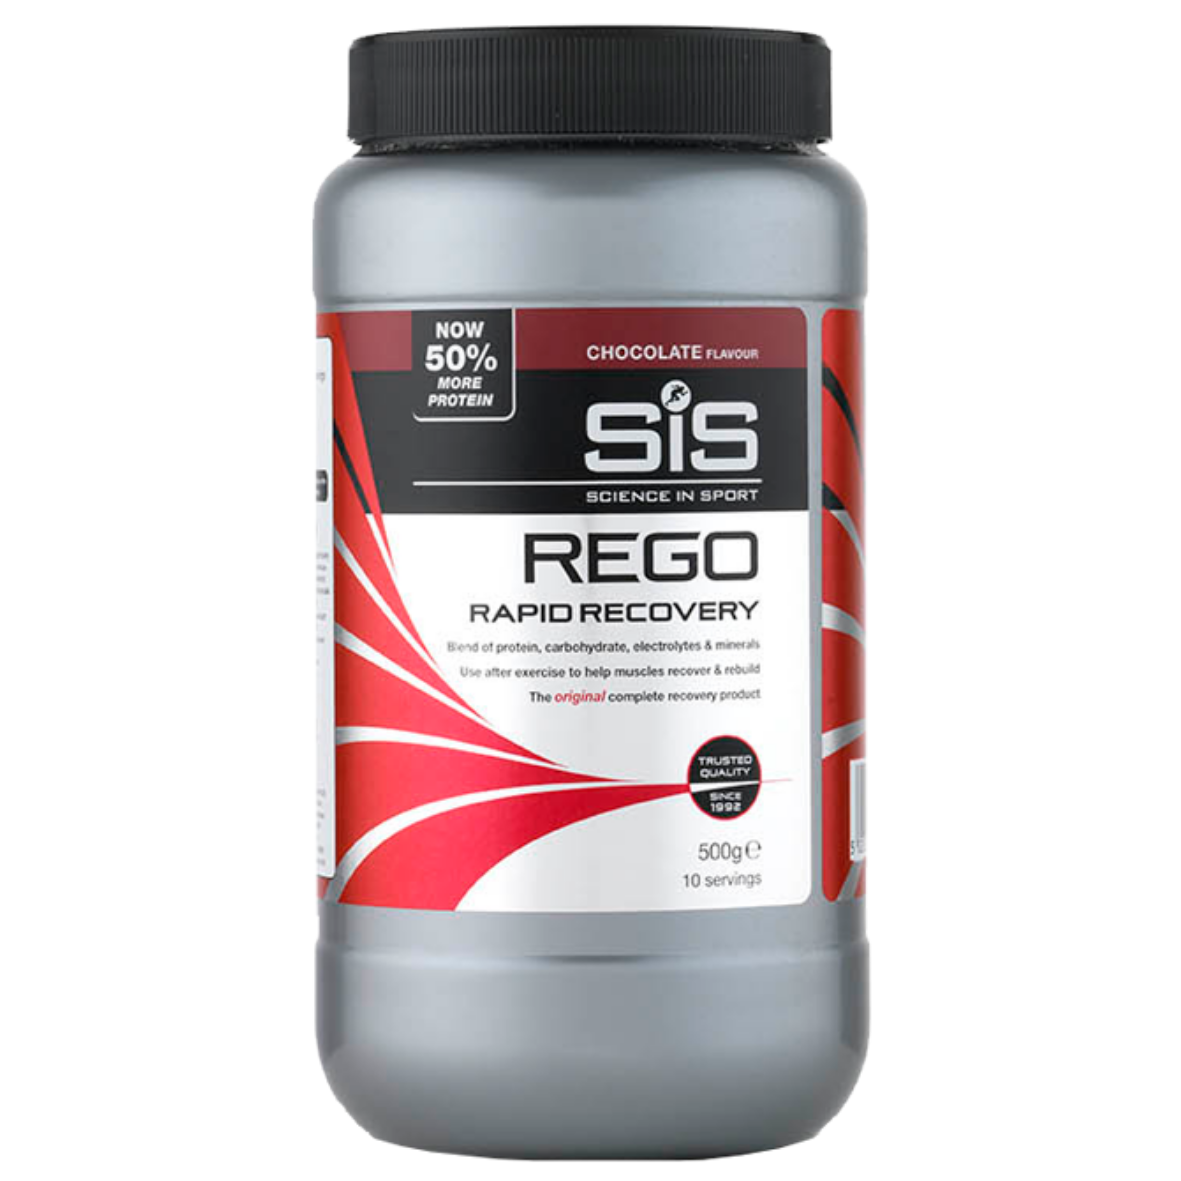 Science in Sport REGO Rapid Recovery Chocolate Protein 